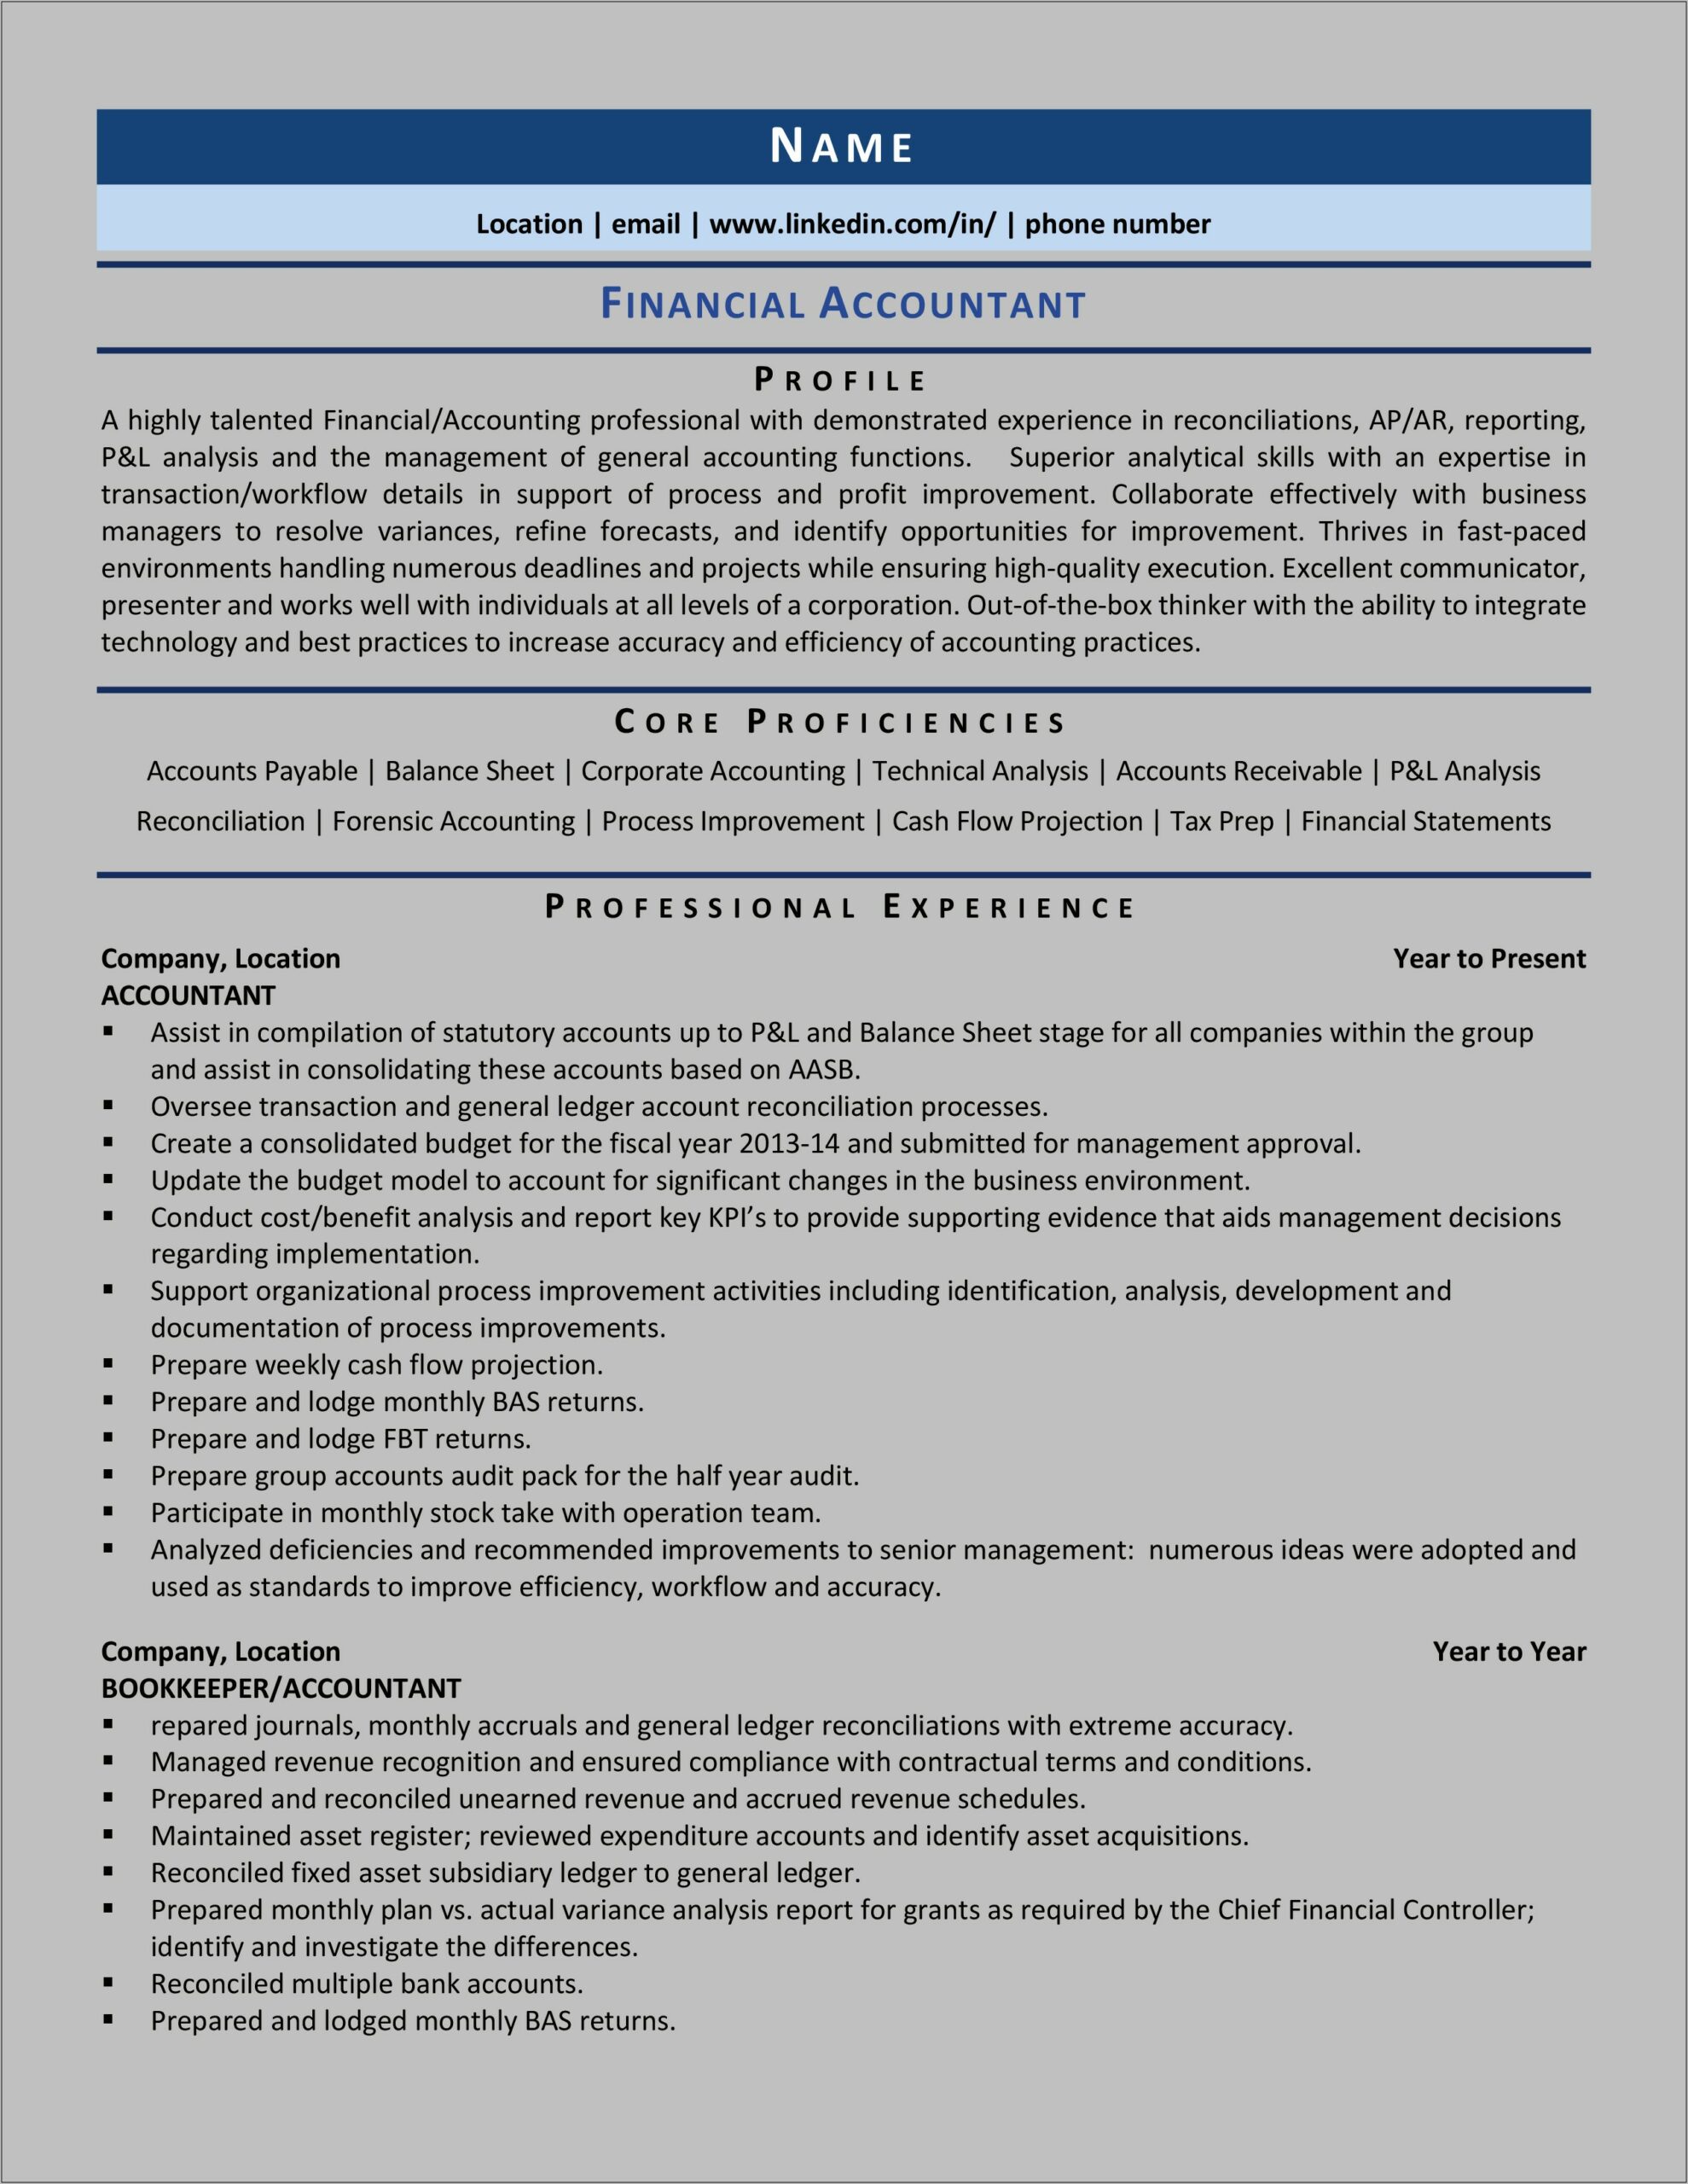 Resume For Financial Manager Position